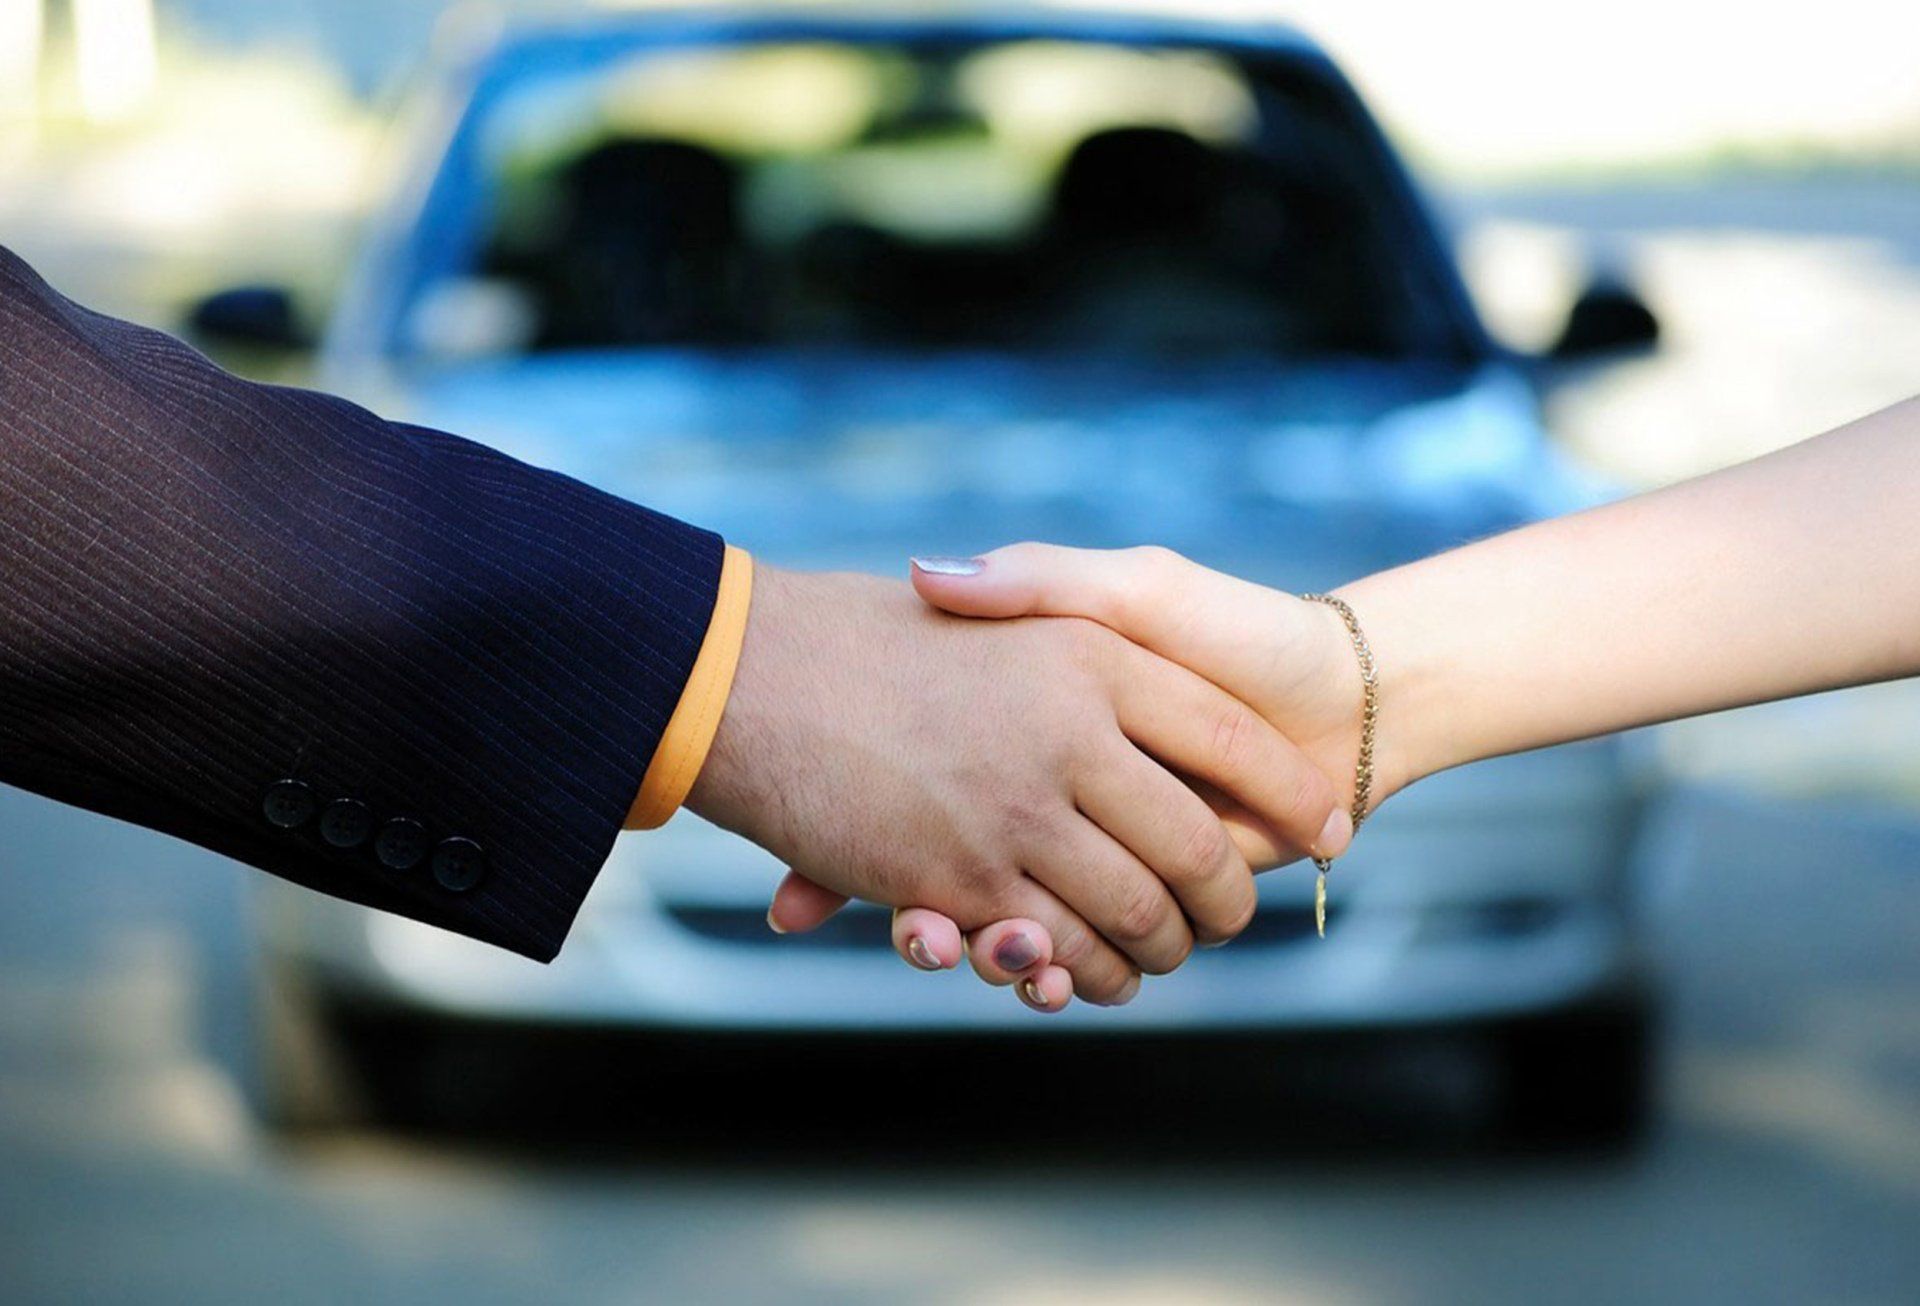 Handshake in front of a car